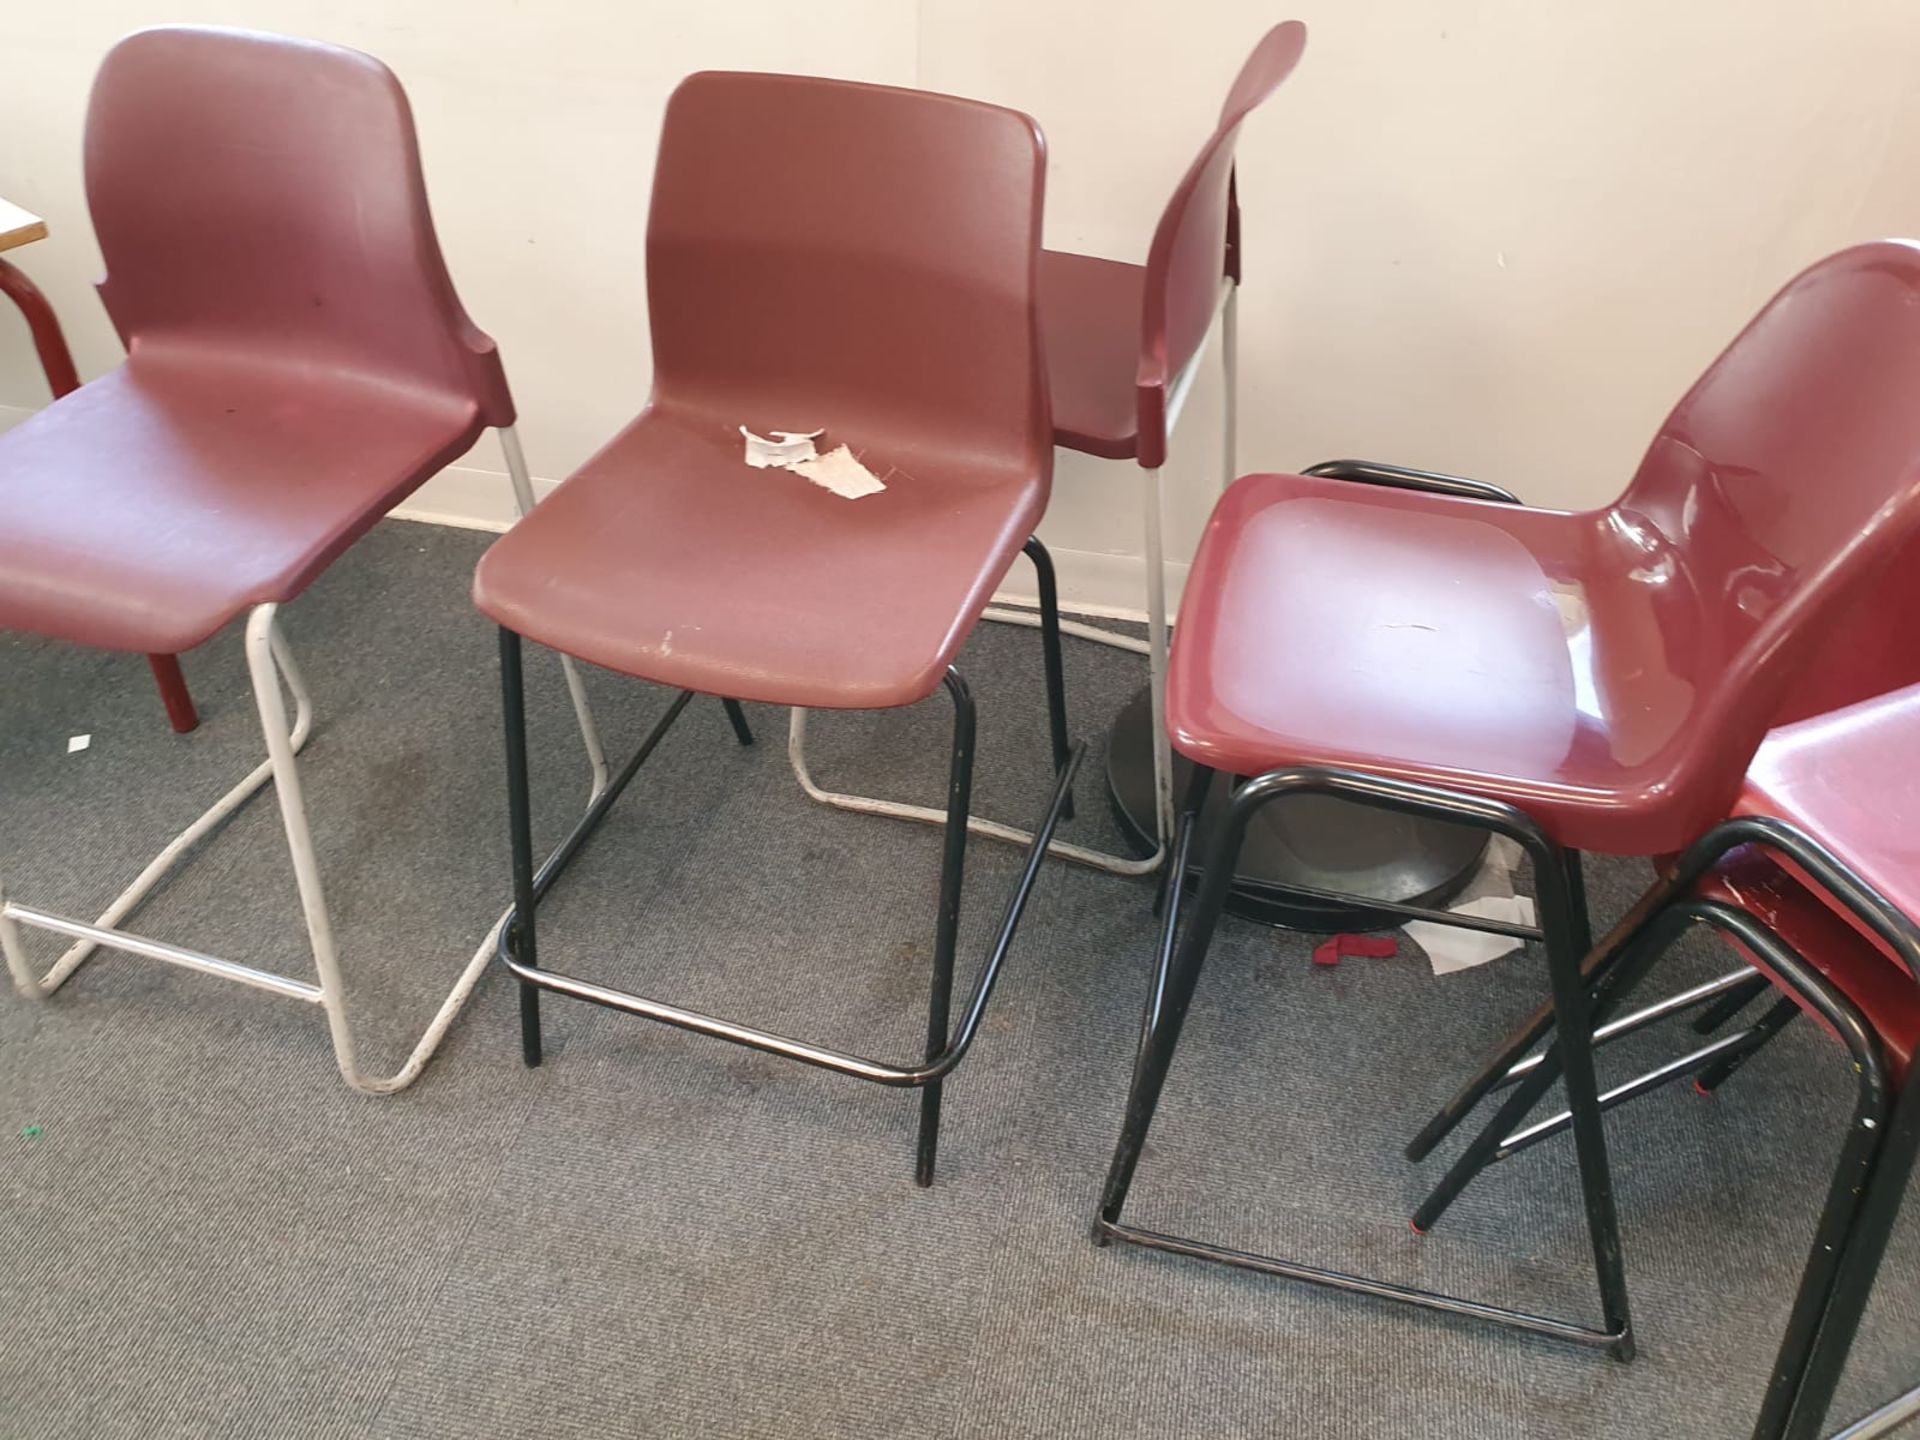 Approx 80 x Various Plastic School Chairs - In Red and Black - CL499 - Location: Borehamwood - Image 2 of 6